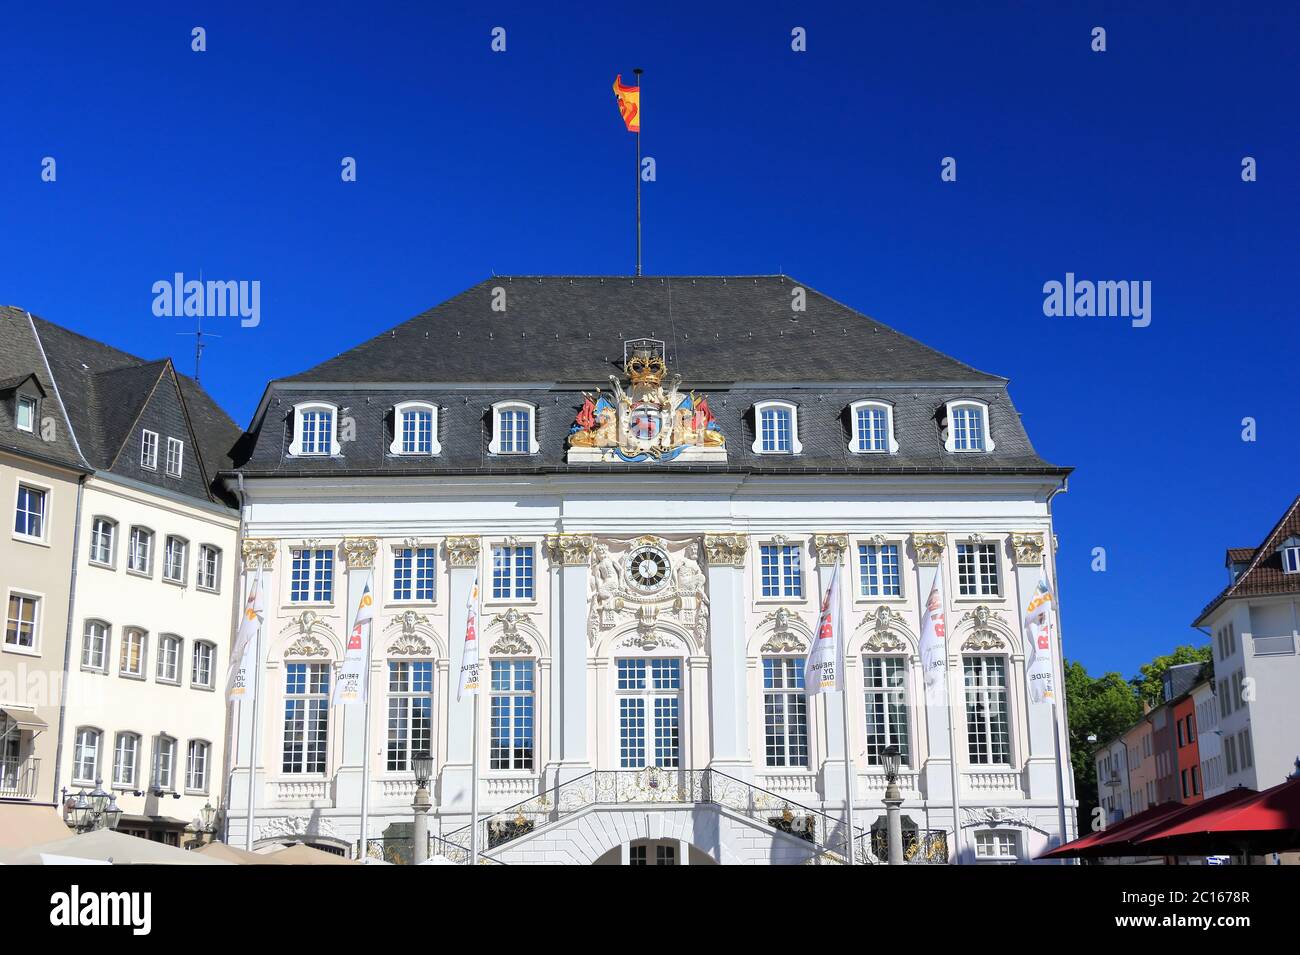 The Altes Rathaus (old town hall) as seen from the central market square. Bonn, Germany. It was built in Rococo-style in 1737 - 1738. Stock Photo